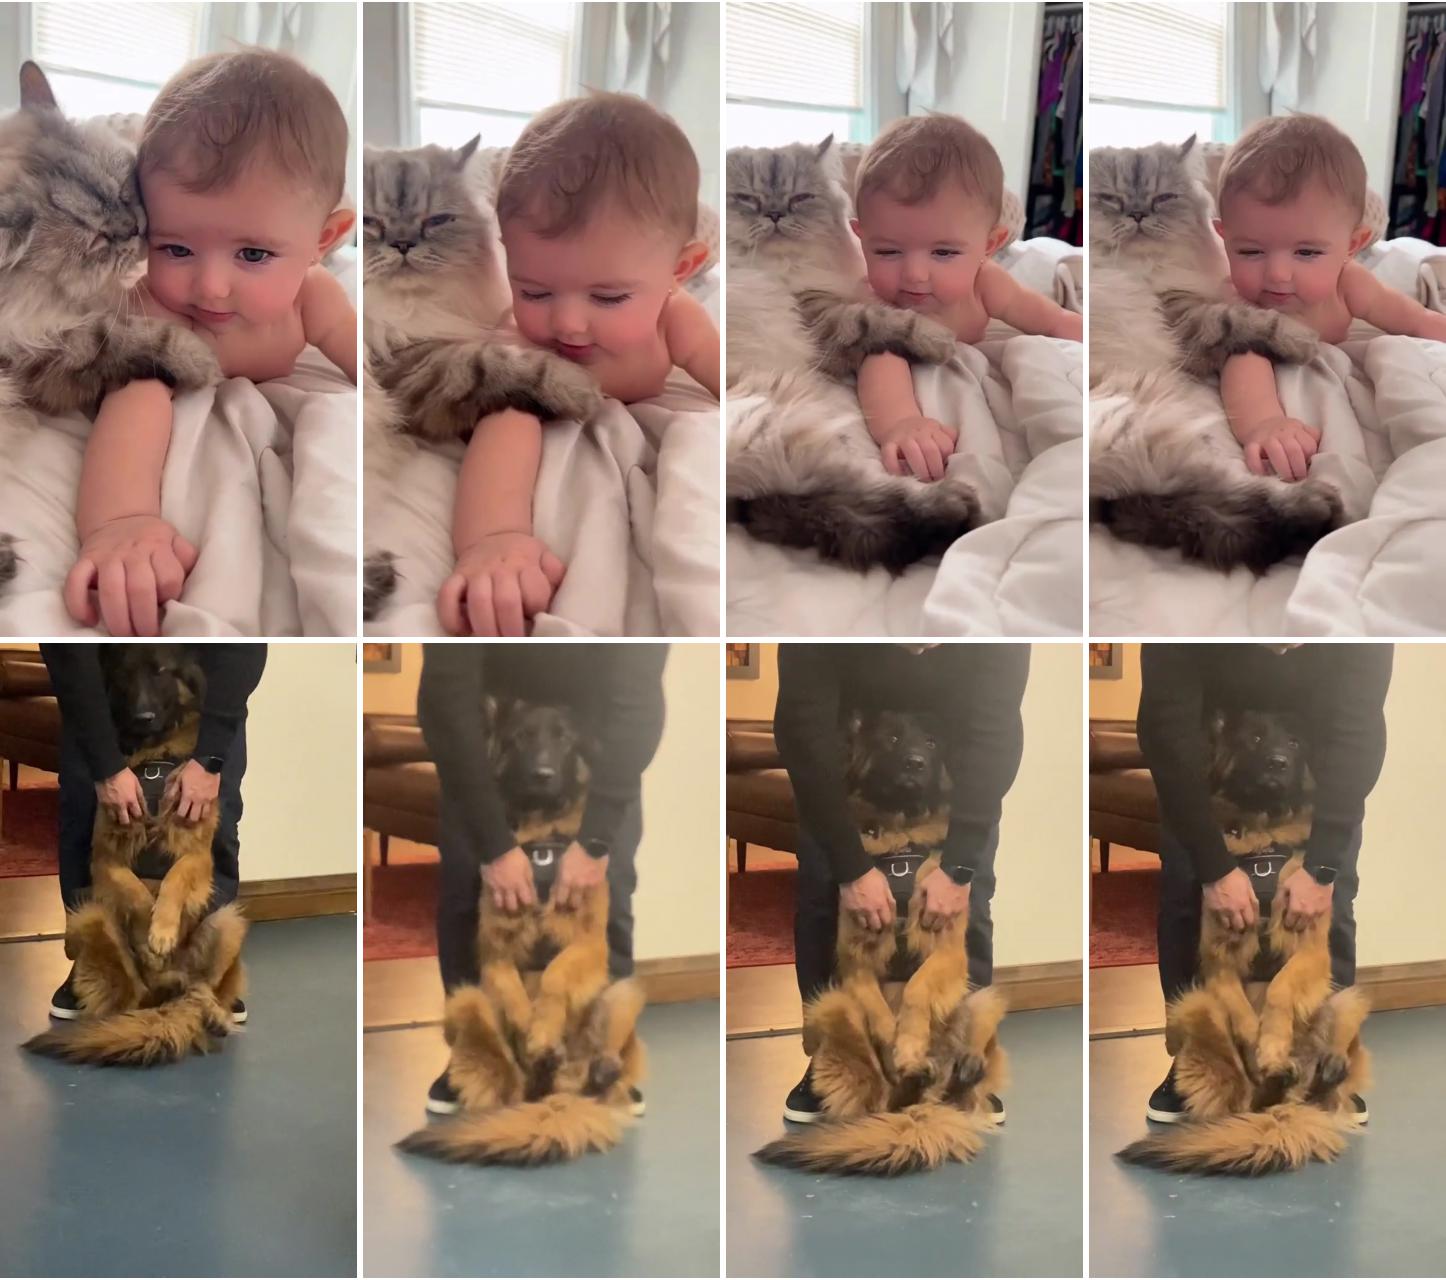 Just don't stop; cute baby videos